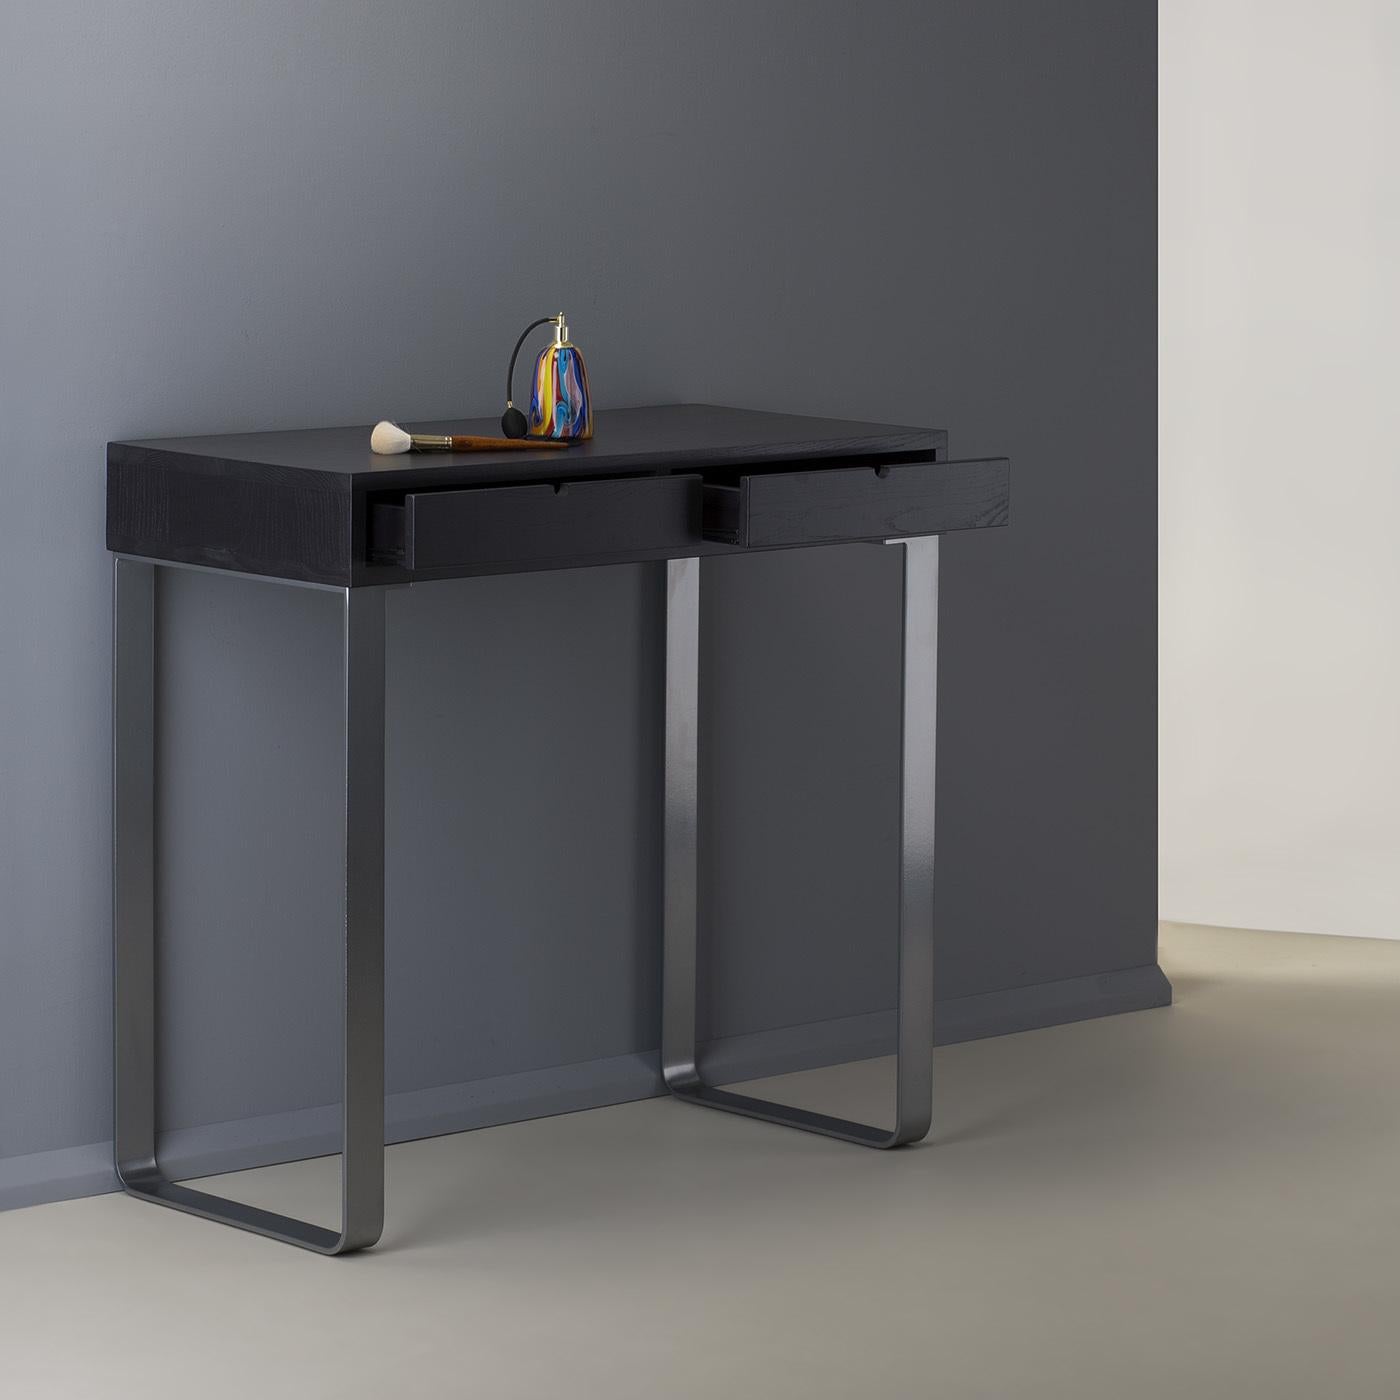 Designed with essential and simple lines to match all of Unica's luxury mirrors, this vanity desk features a black-varnished structure with a rectangular ash wood top supported by two, U-shaped silver aluminum legs. The two front drawers provide